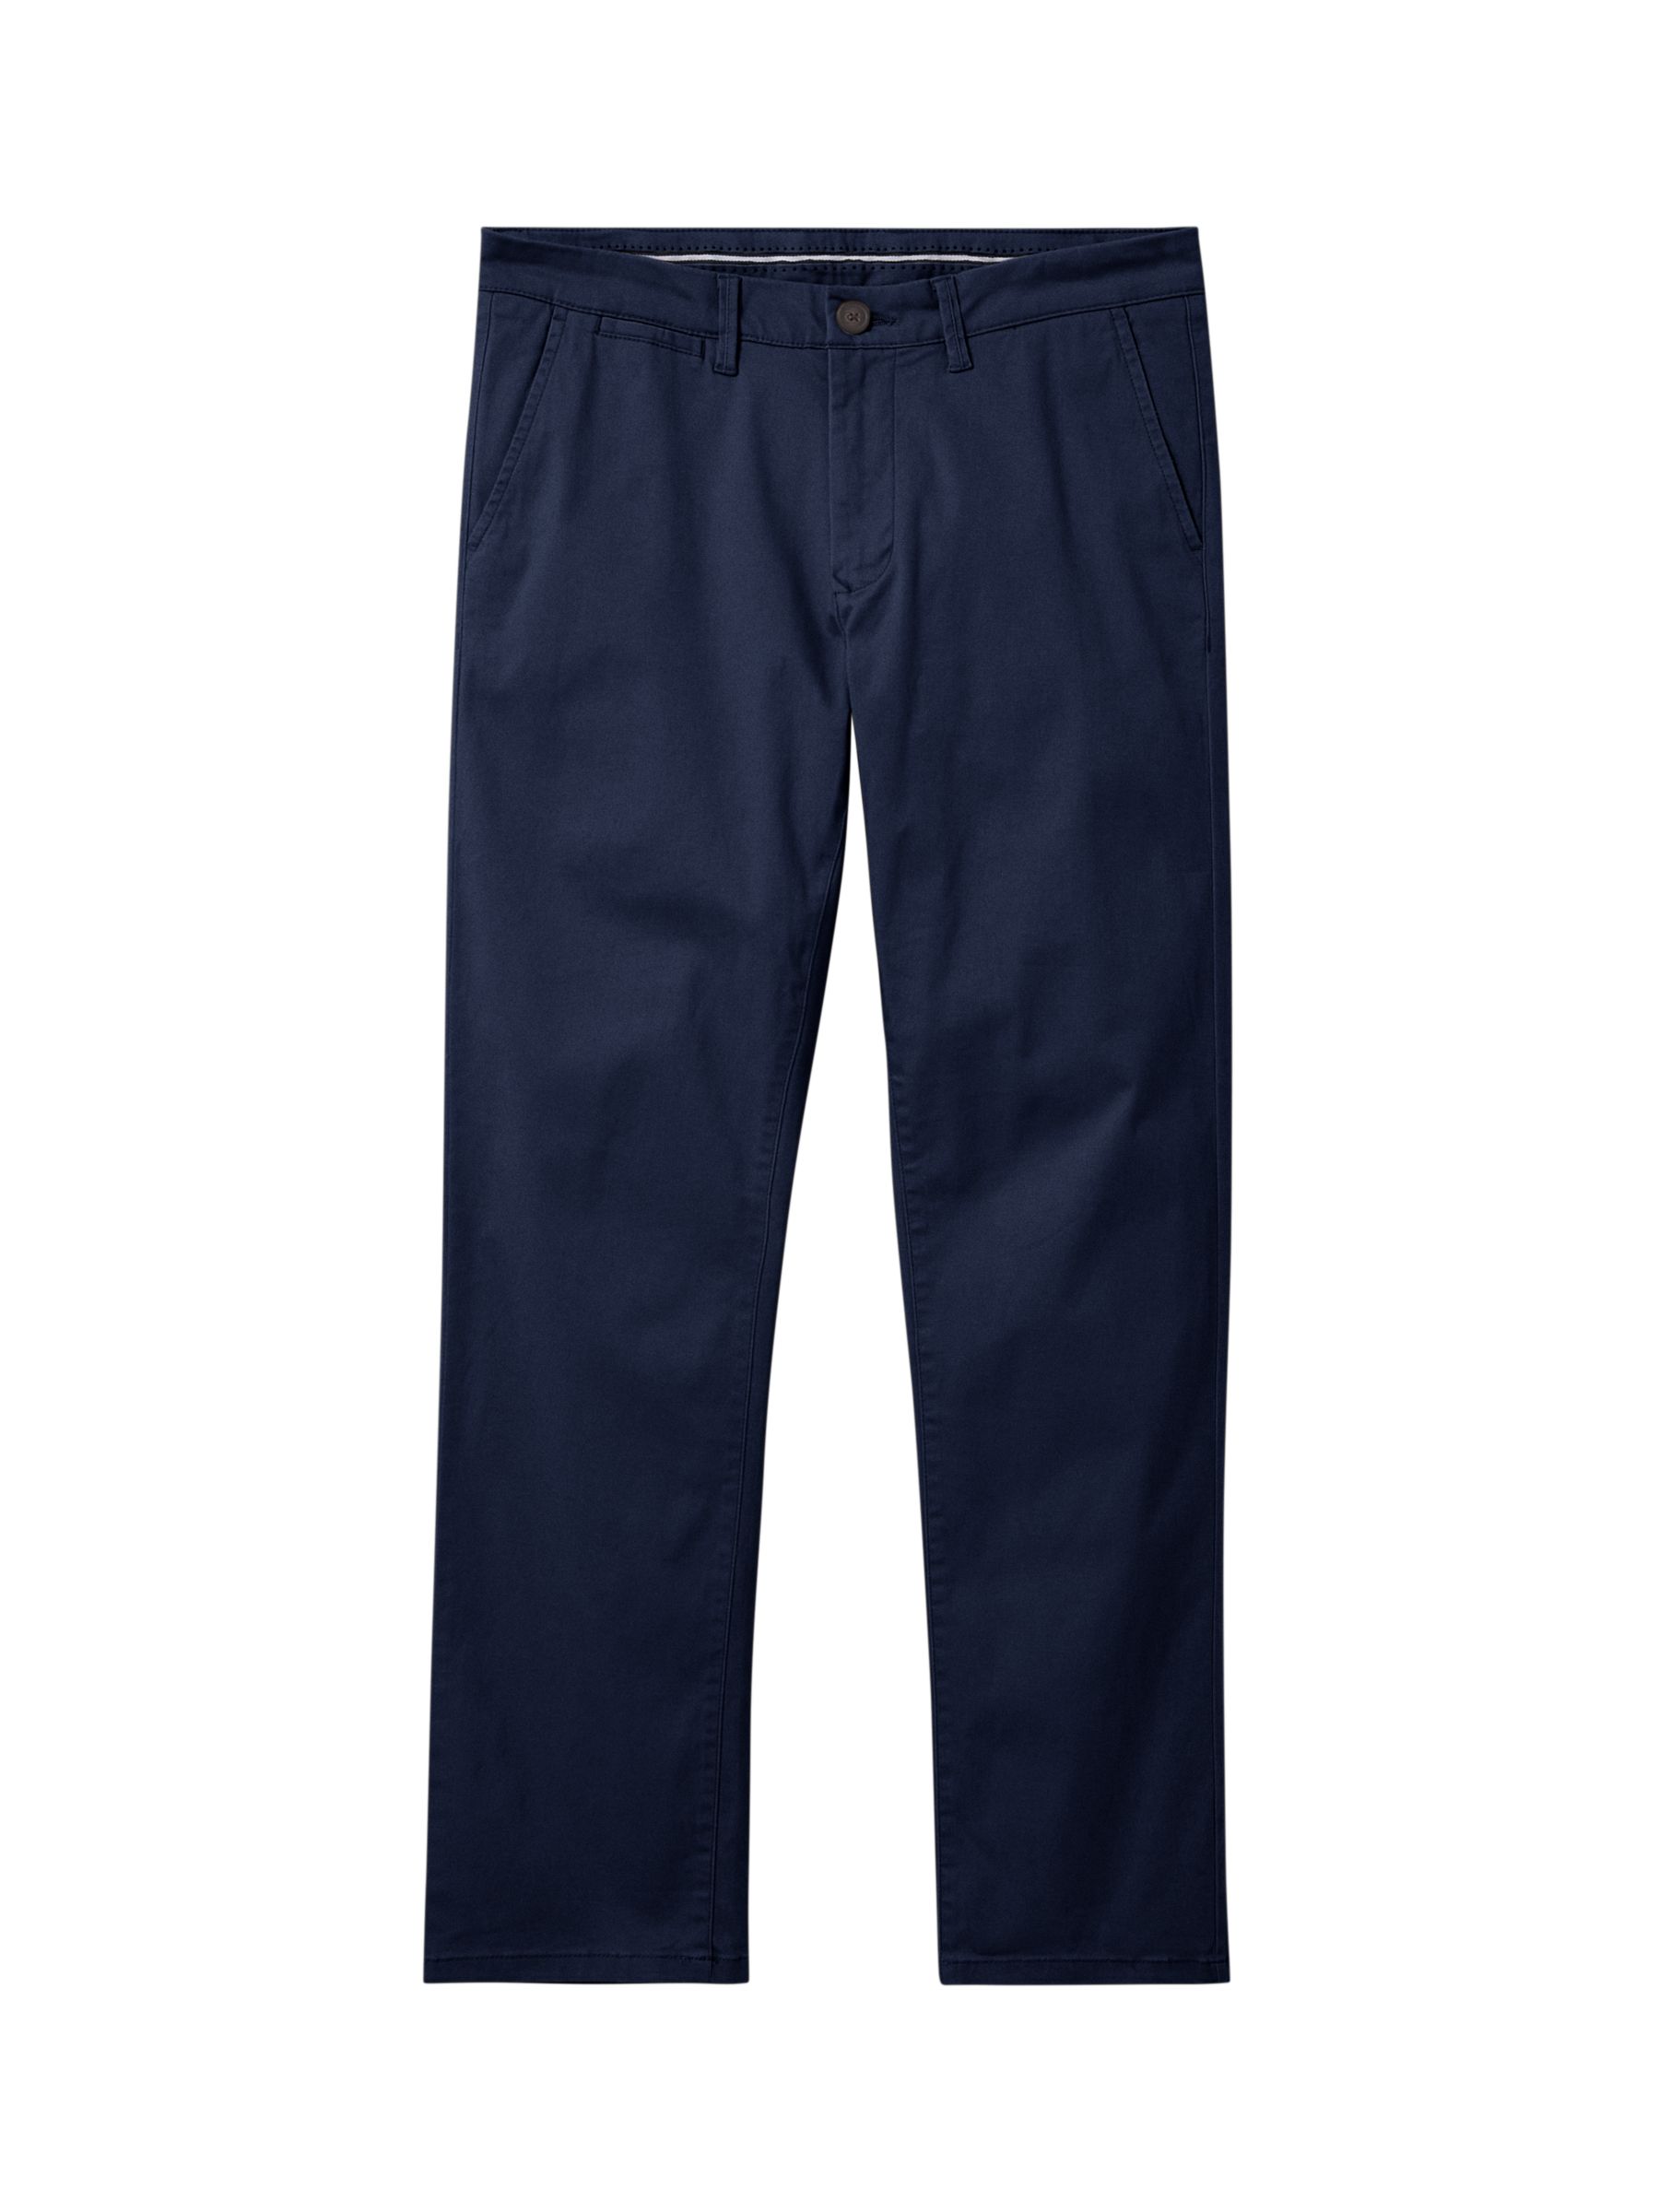 Crew Clothing Straight Fit Chinos, Navy Blue, 40L